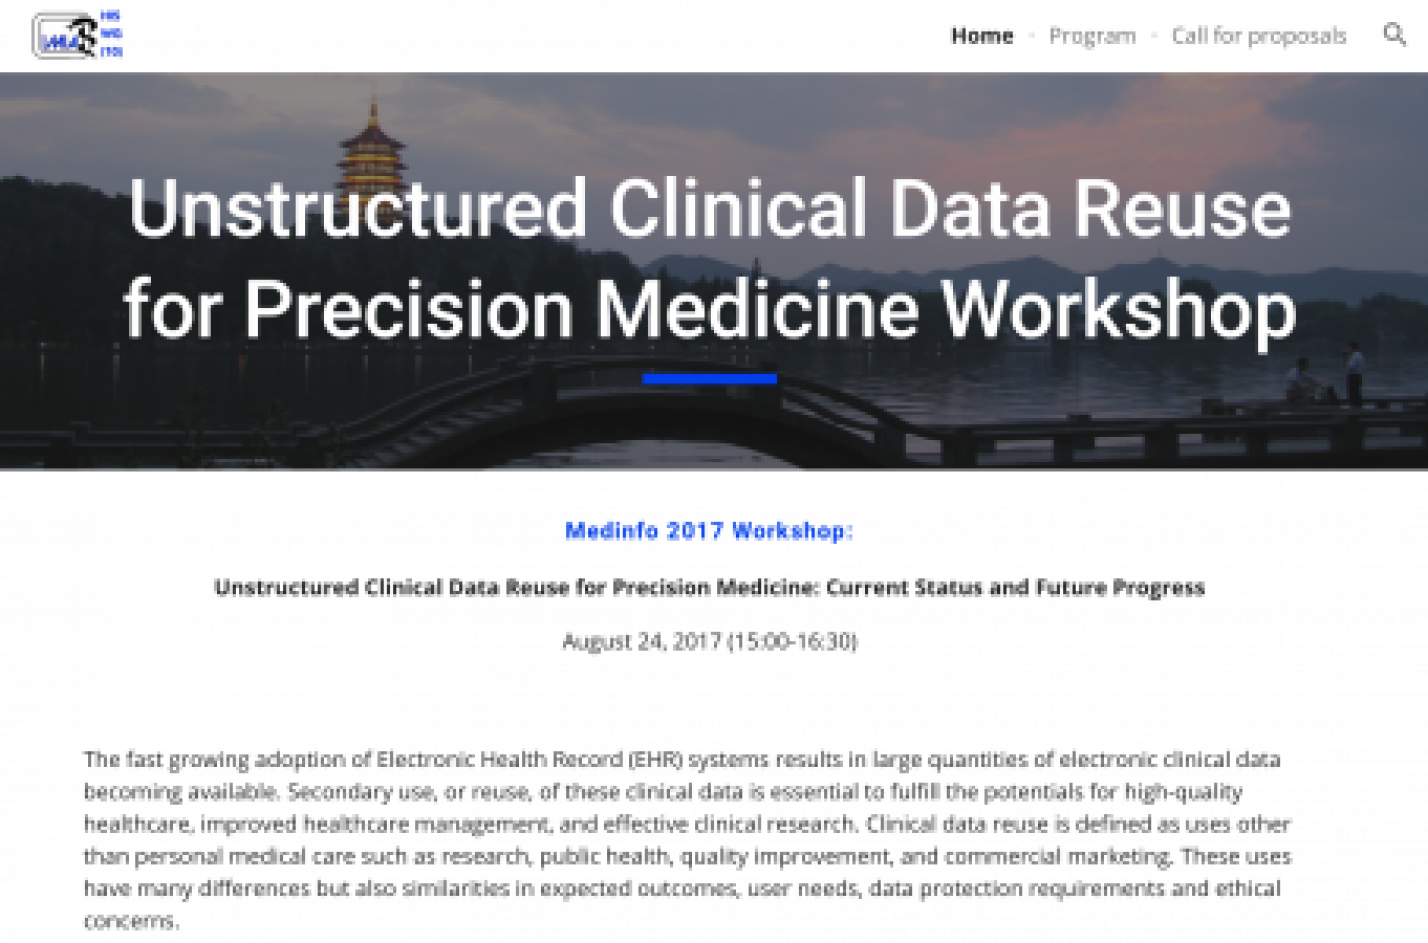 Unstructured Clinical Data Reuse for Precision Medicine